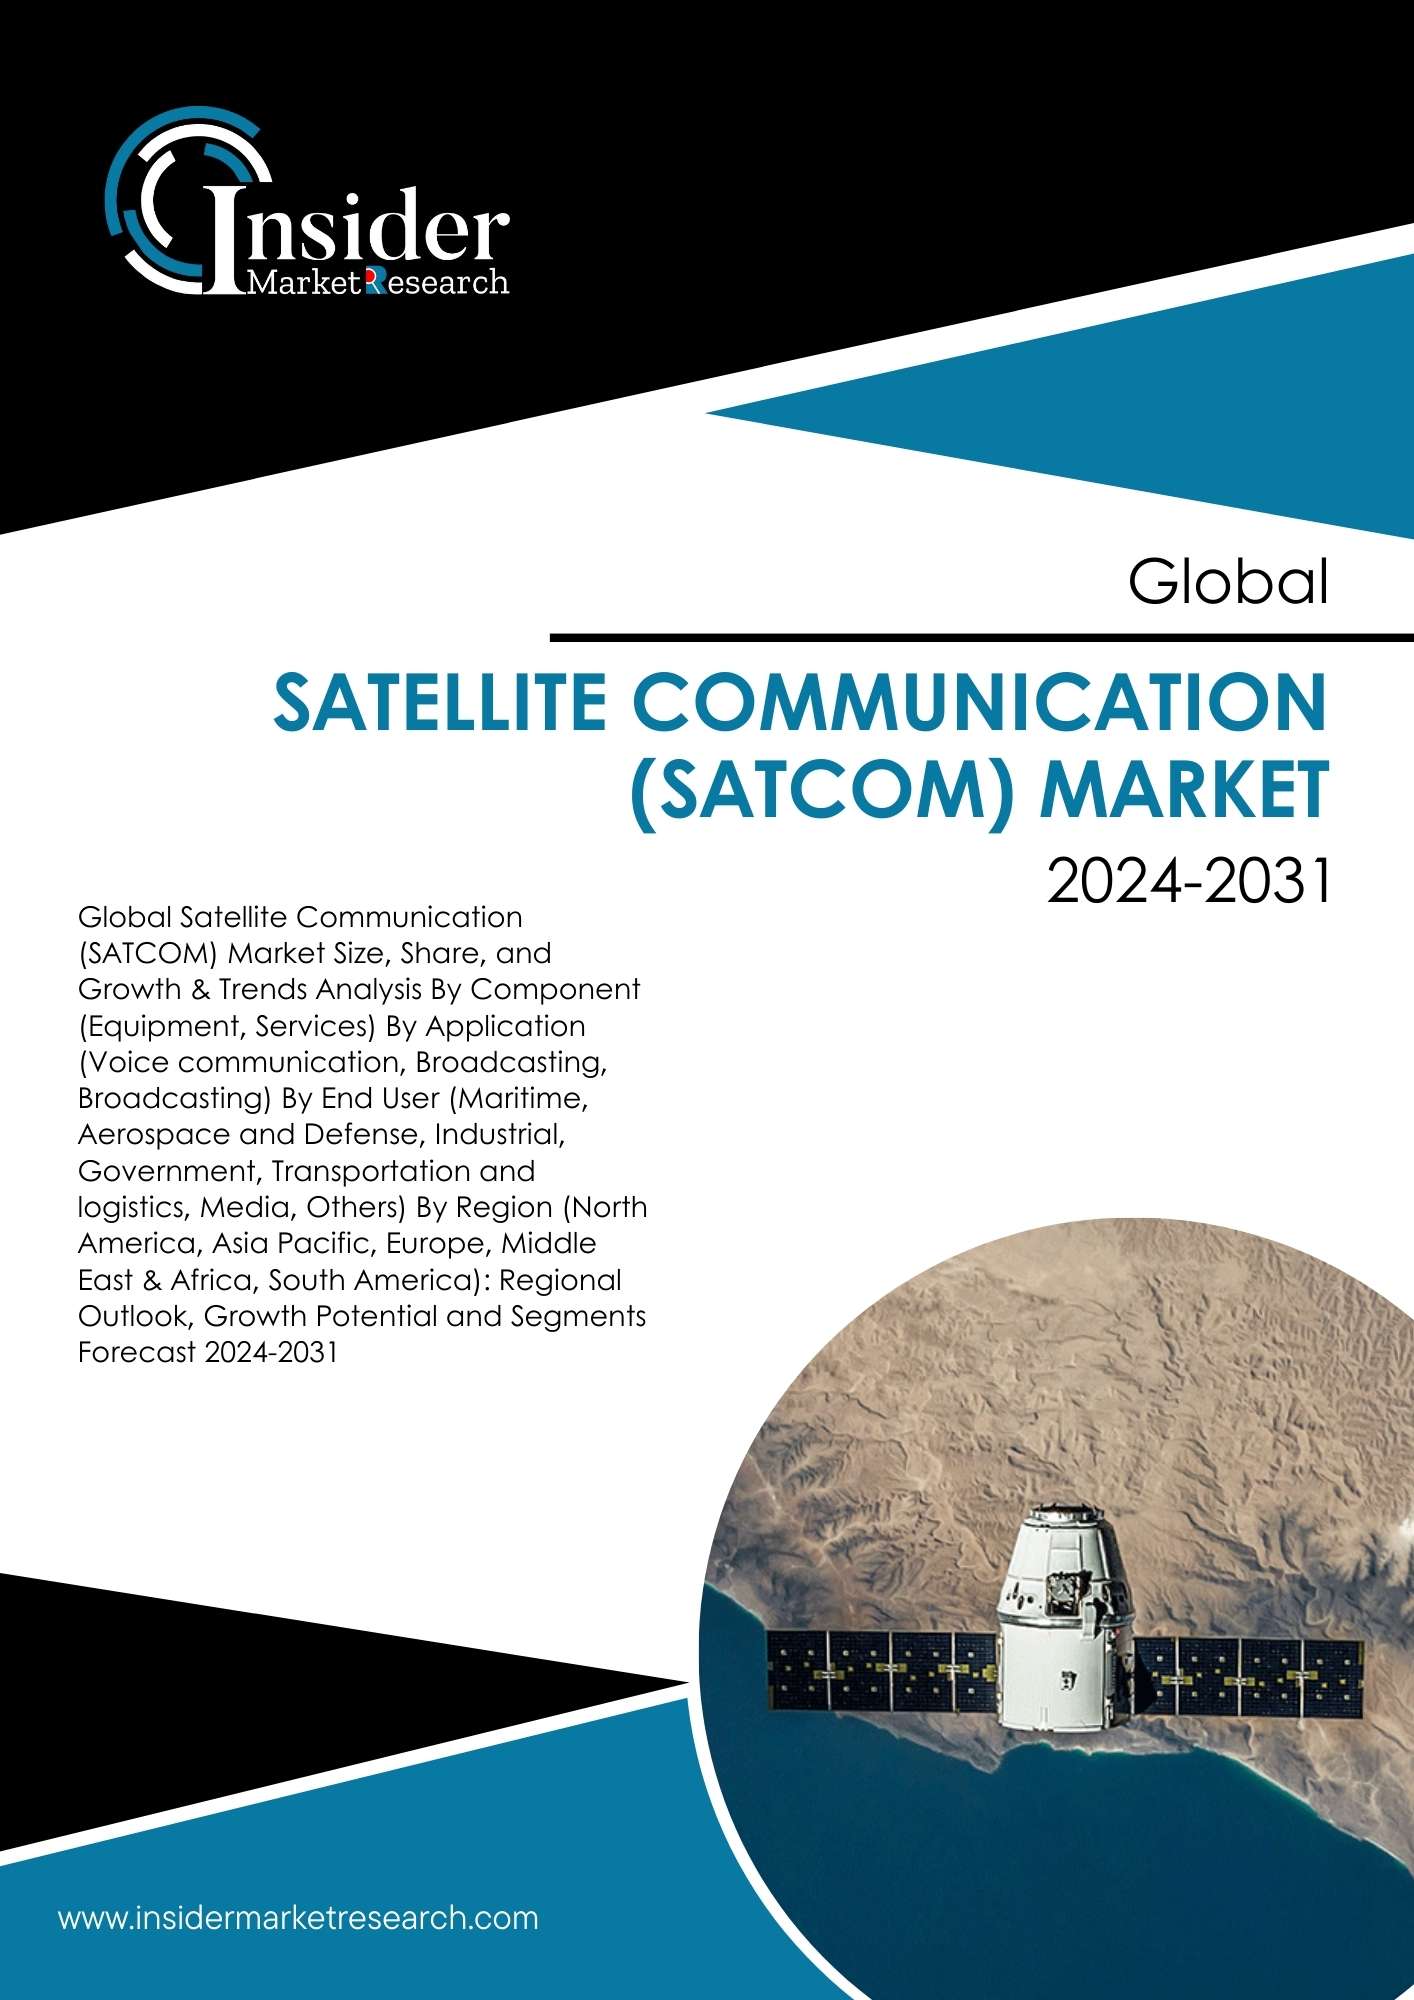 Satellite Communication (SATCOM) Market Size, Demand and Forecast to 2031 | Insider Market Research